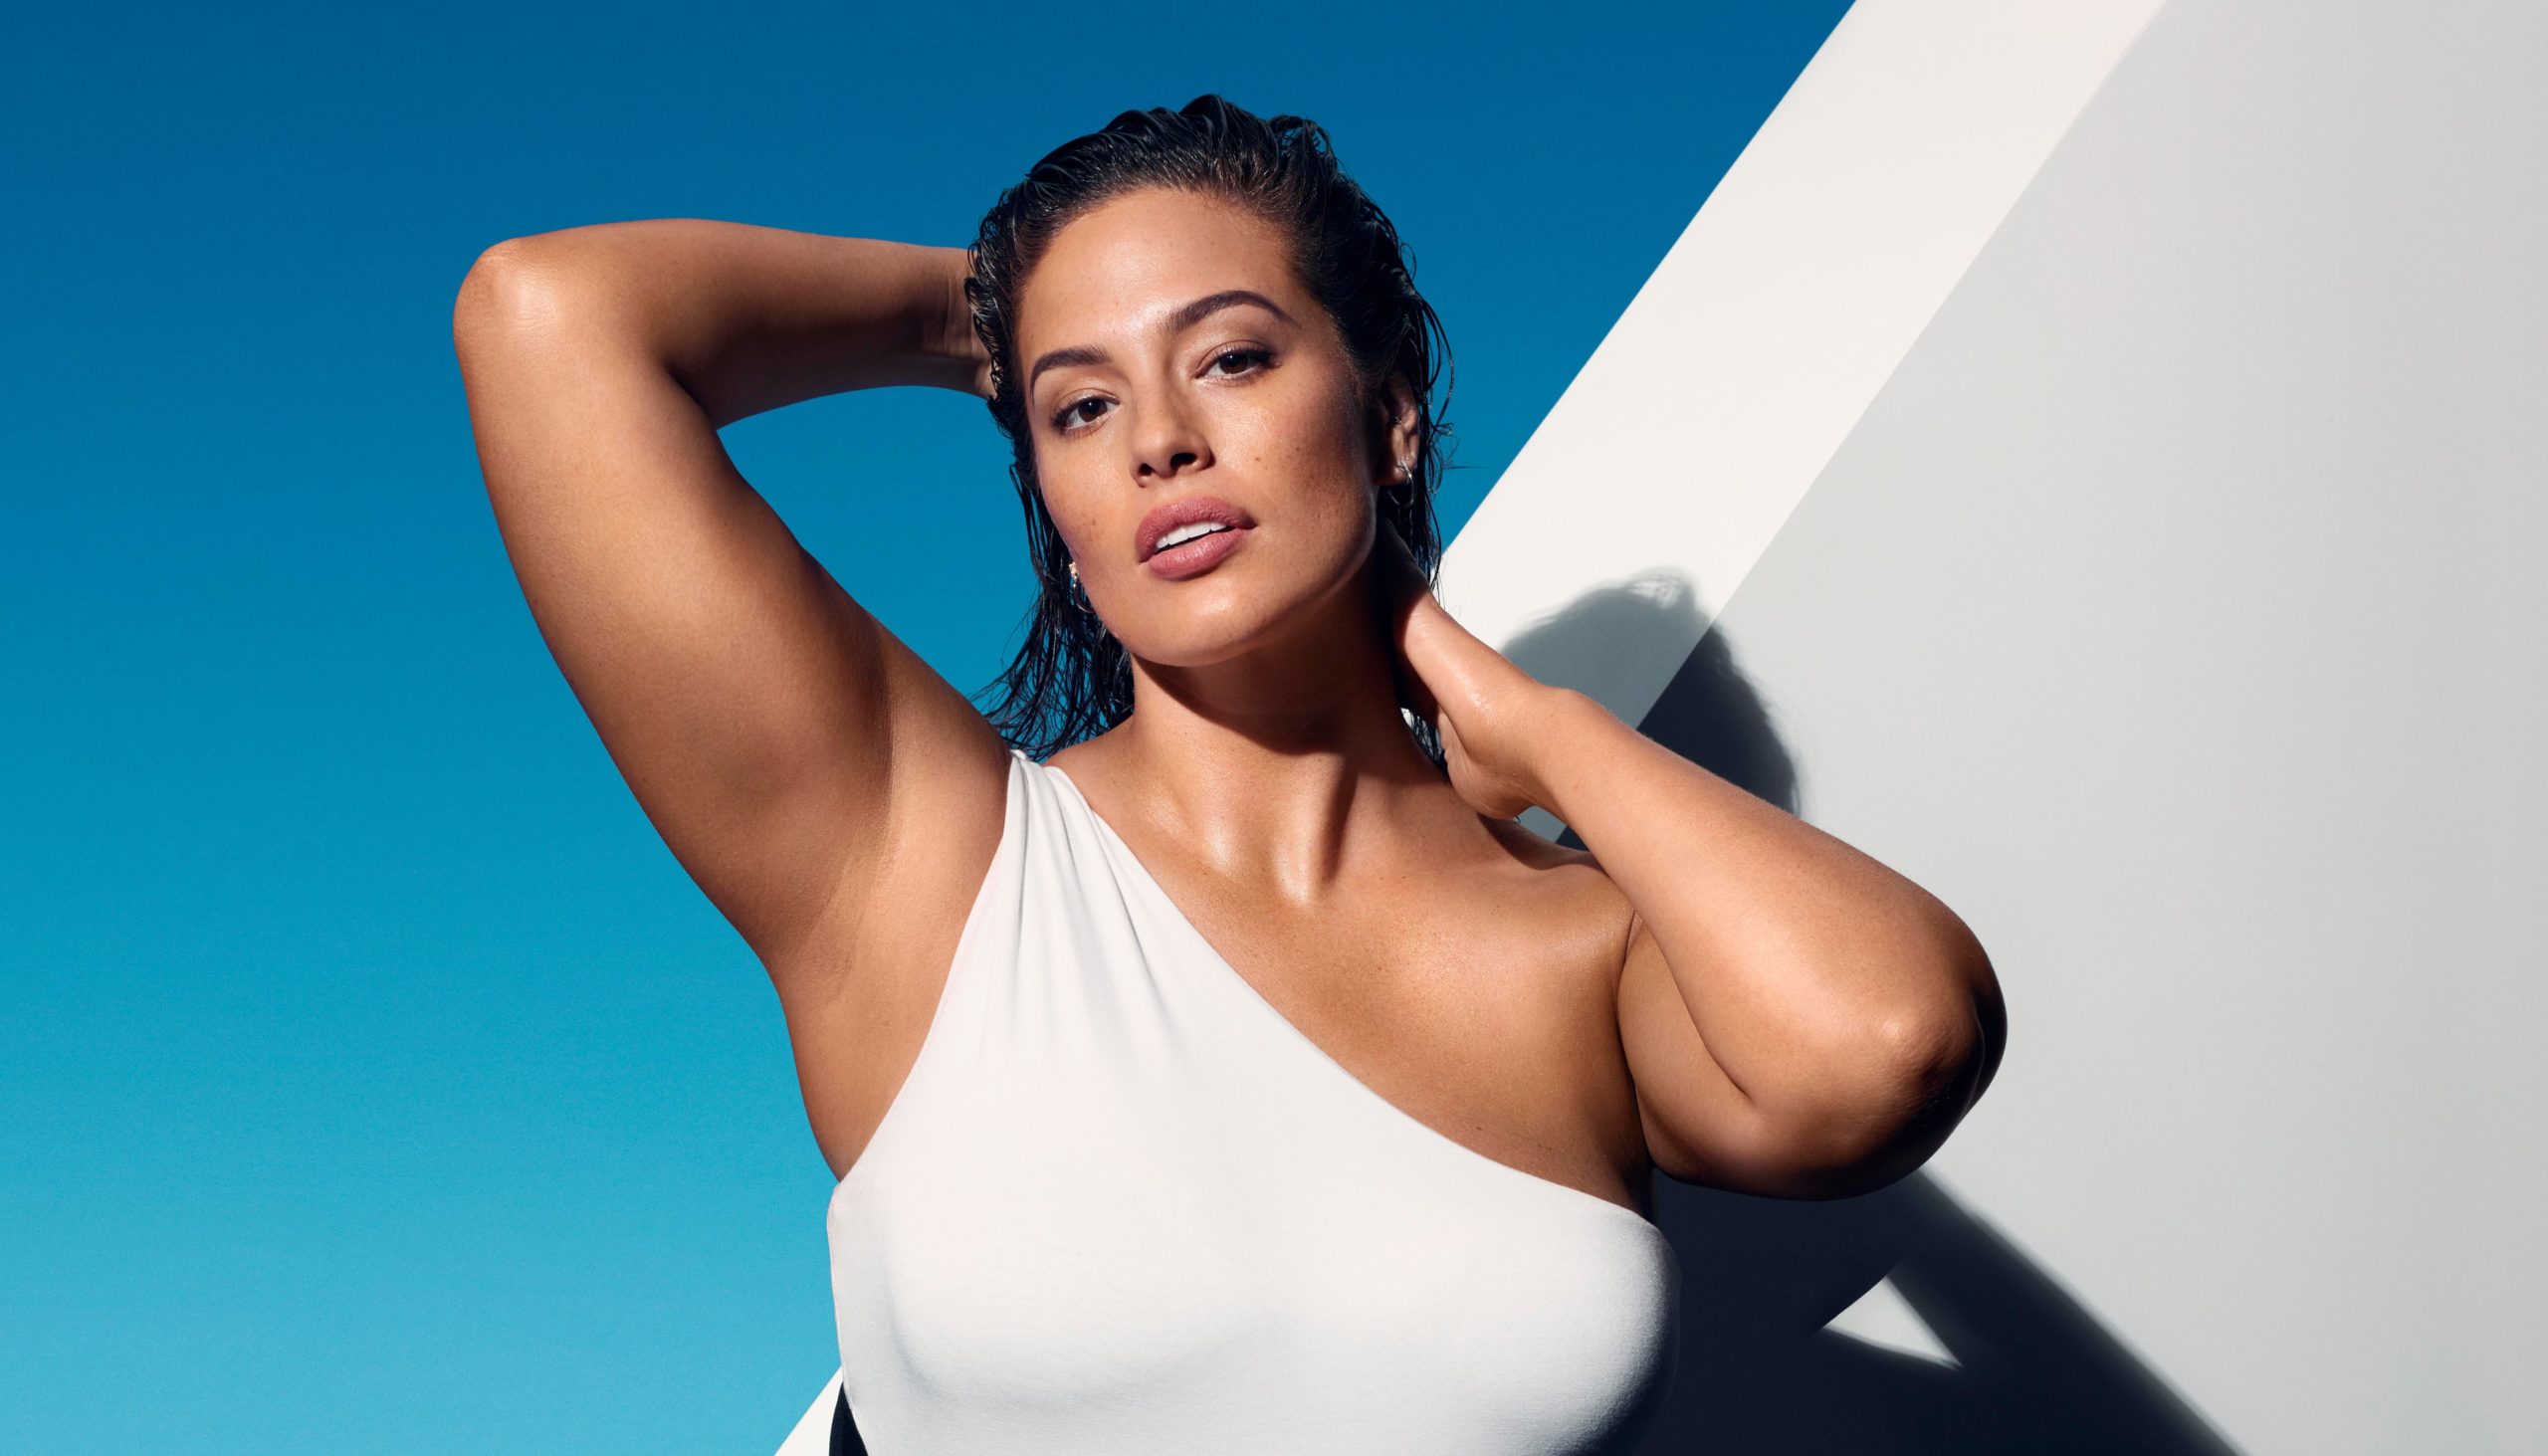 Ashley Graham and St. Tropez Collaborated on the Easiest-to-Use Self-Tanner Ever